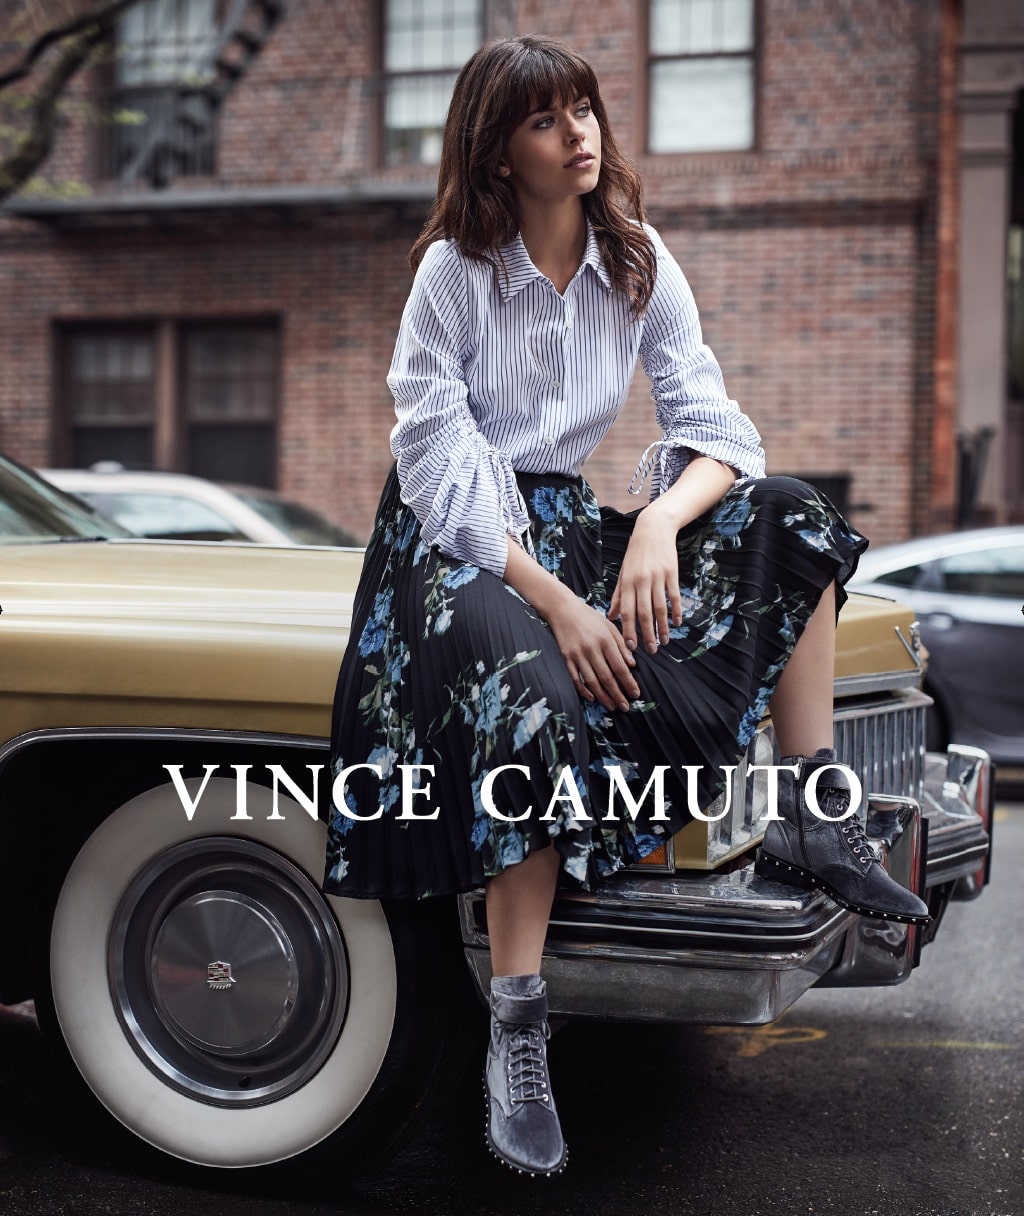 Vince Camuto's Legacy: How He Changed the Business – Footwear News